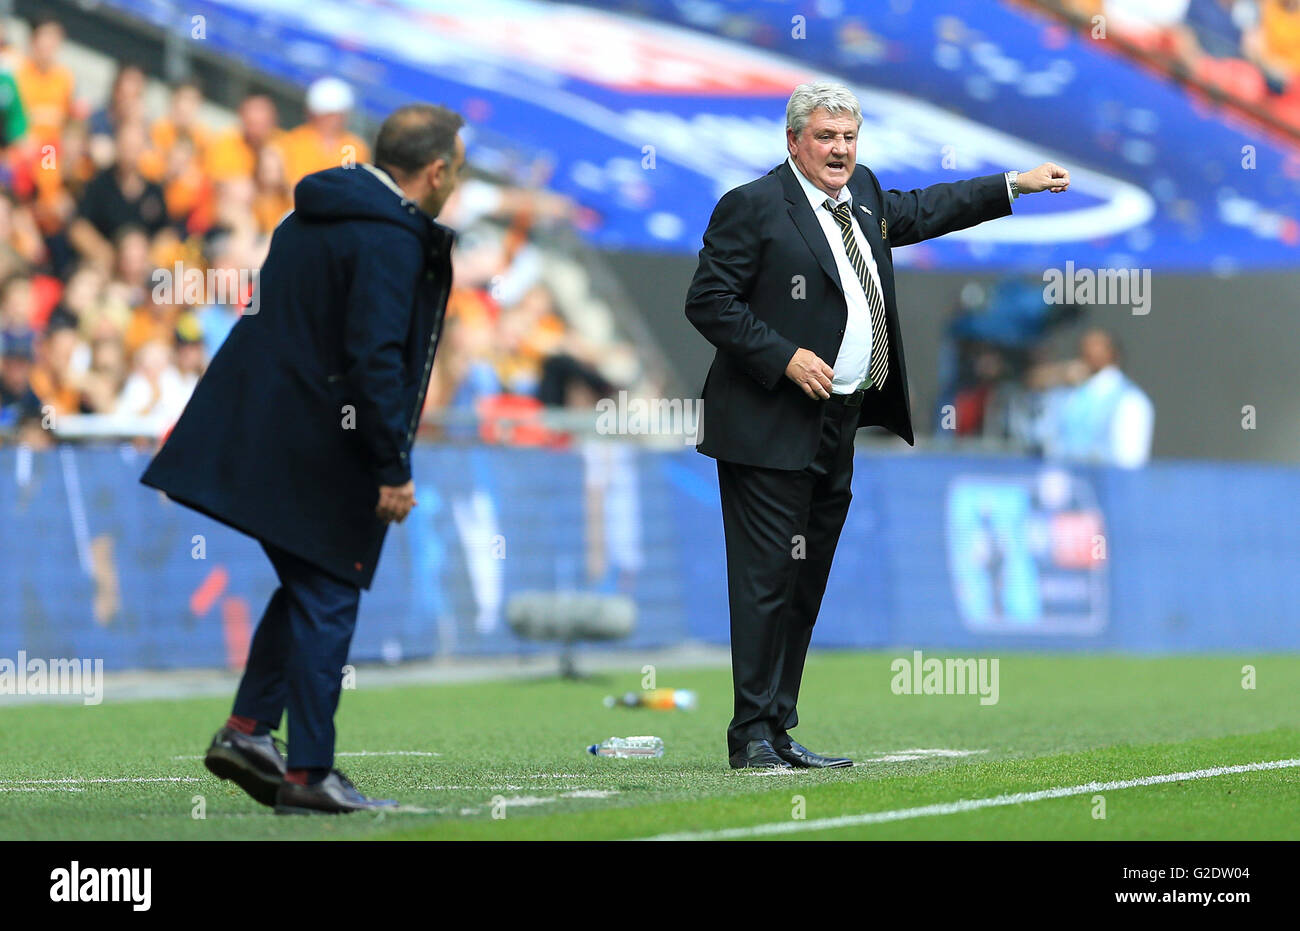 Hull City manager Steve Bruce (right) and Sheffield Wednesday manager Carlos Carvalhal on the touchline during the Championship Play-Off Final at Wembley Stadium, London. Stock Photo